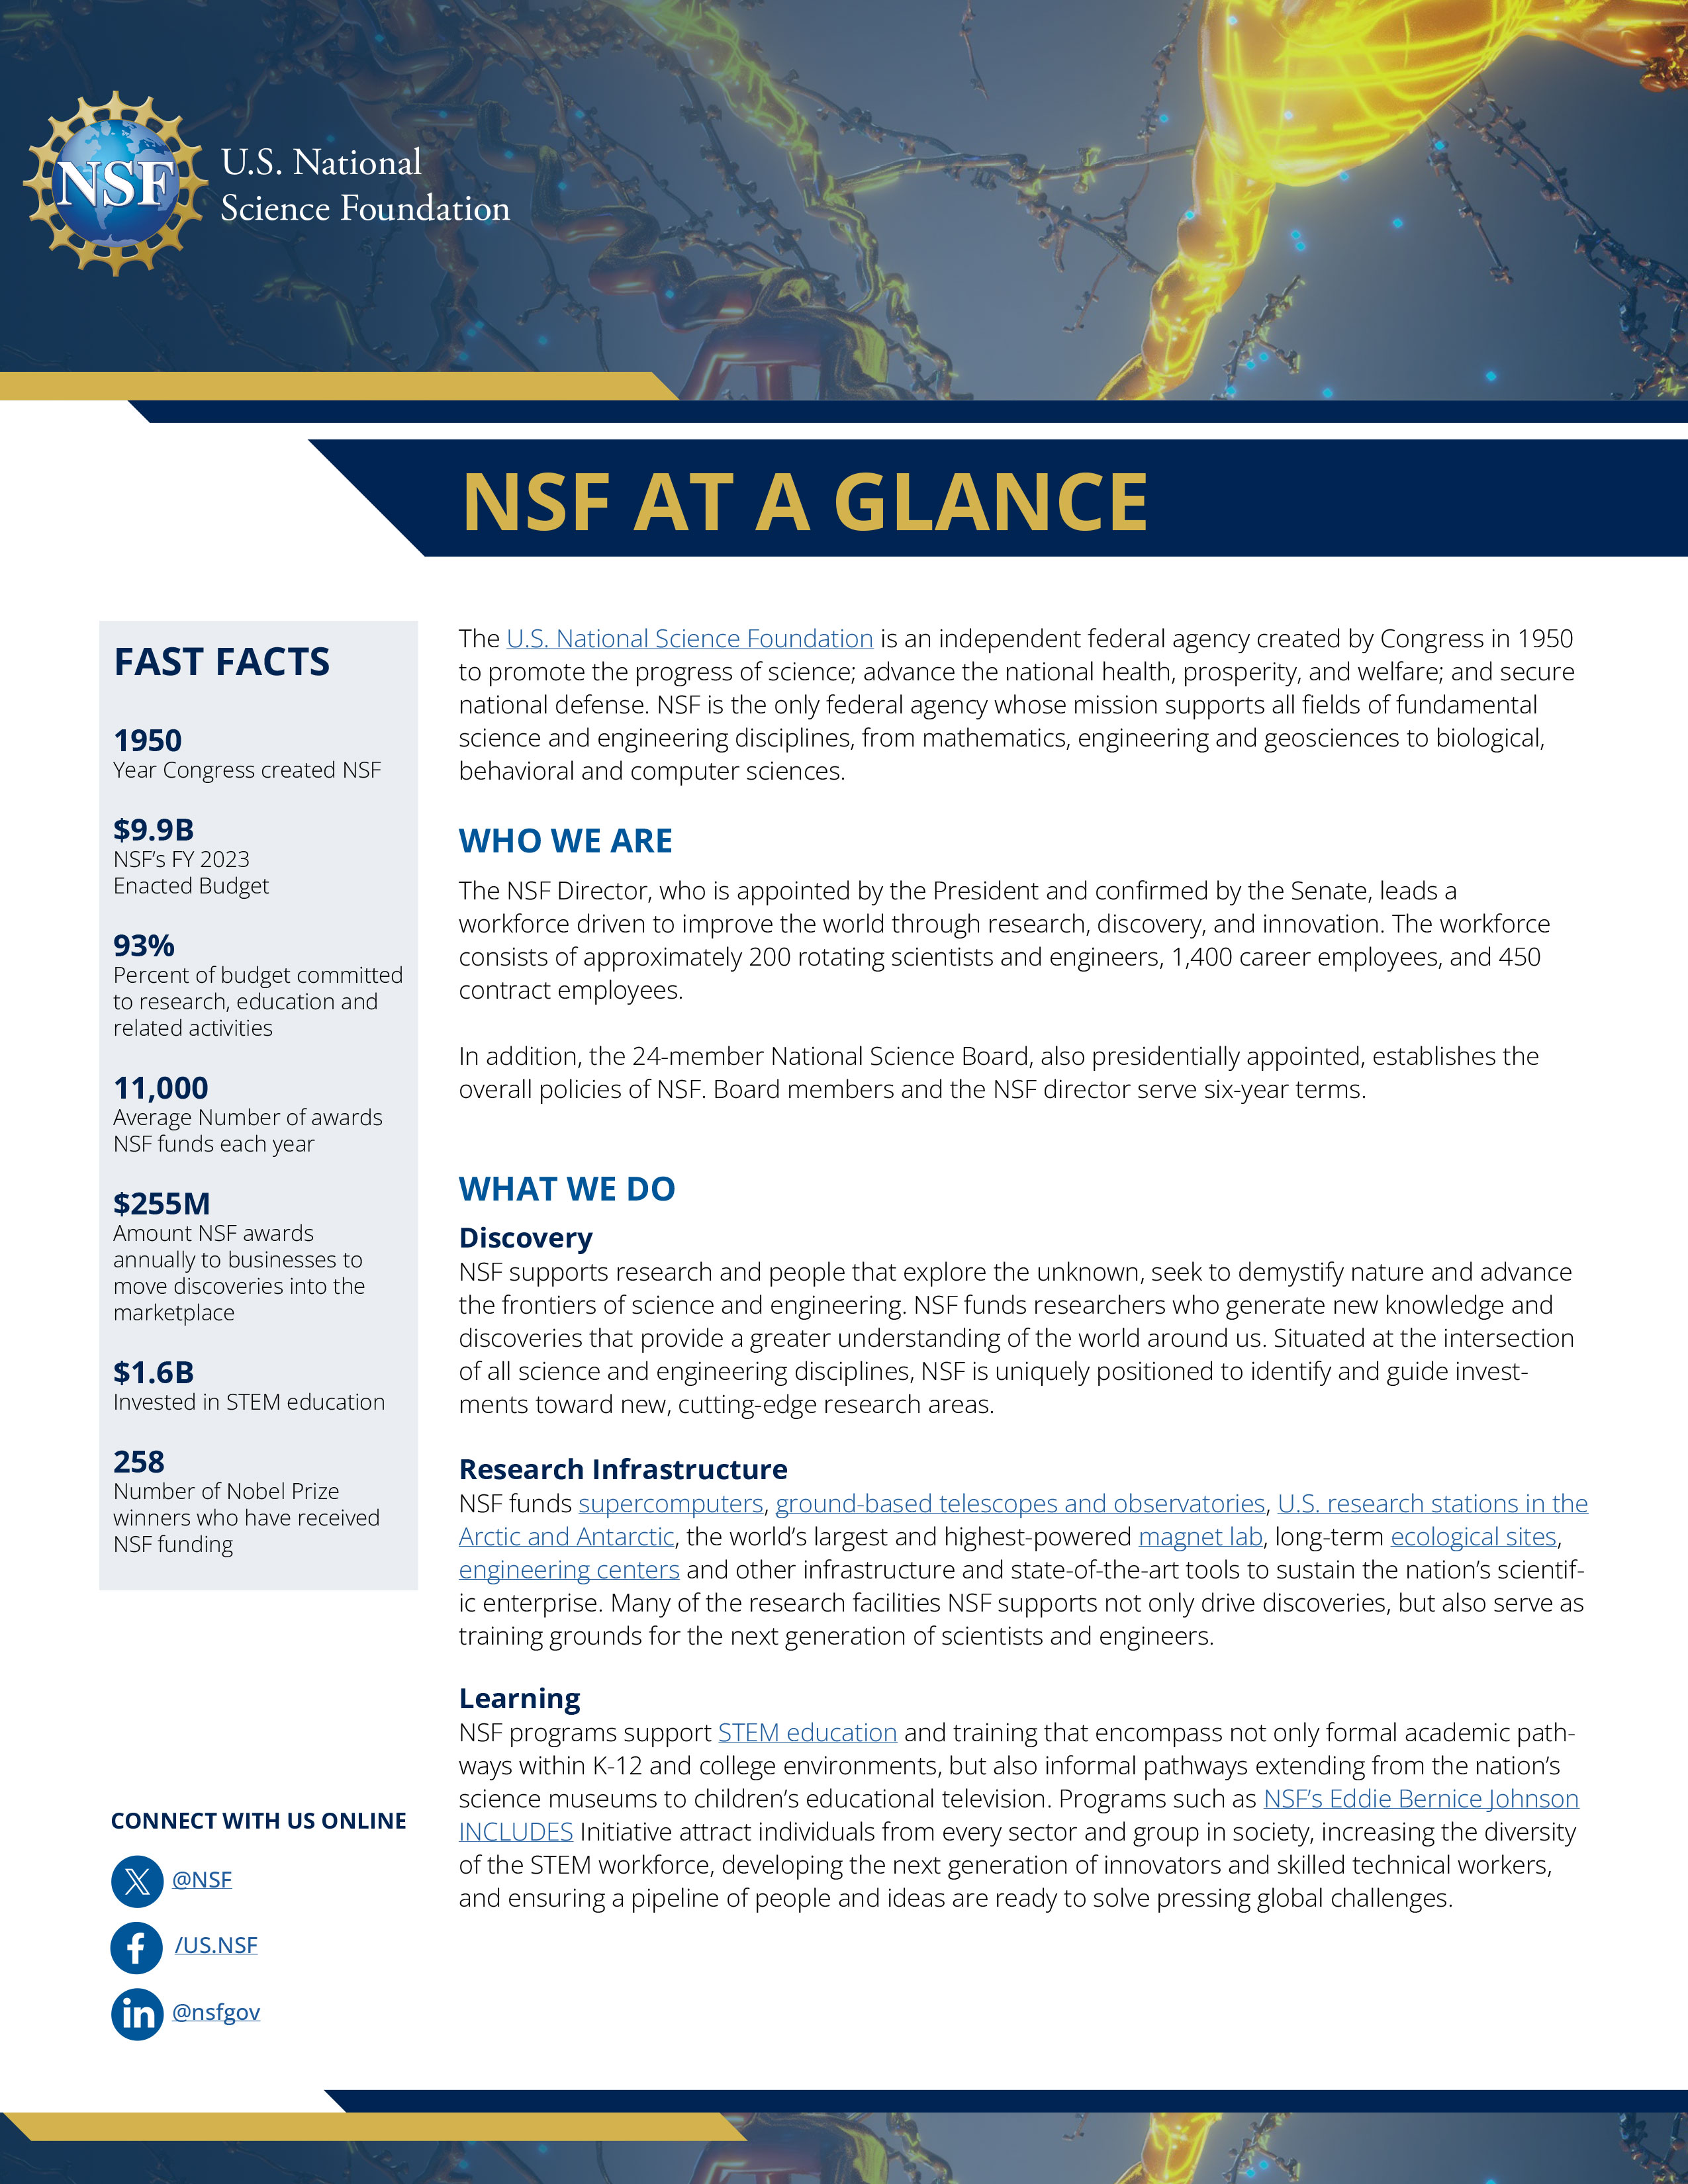 NSF at a Glance cover page